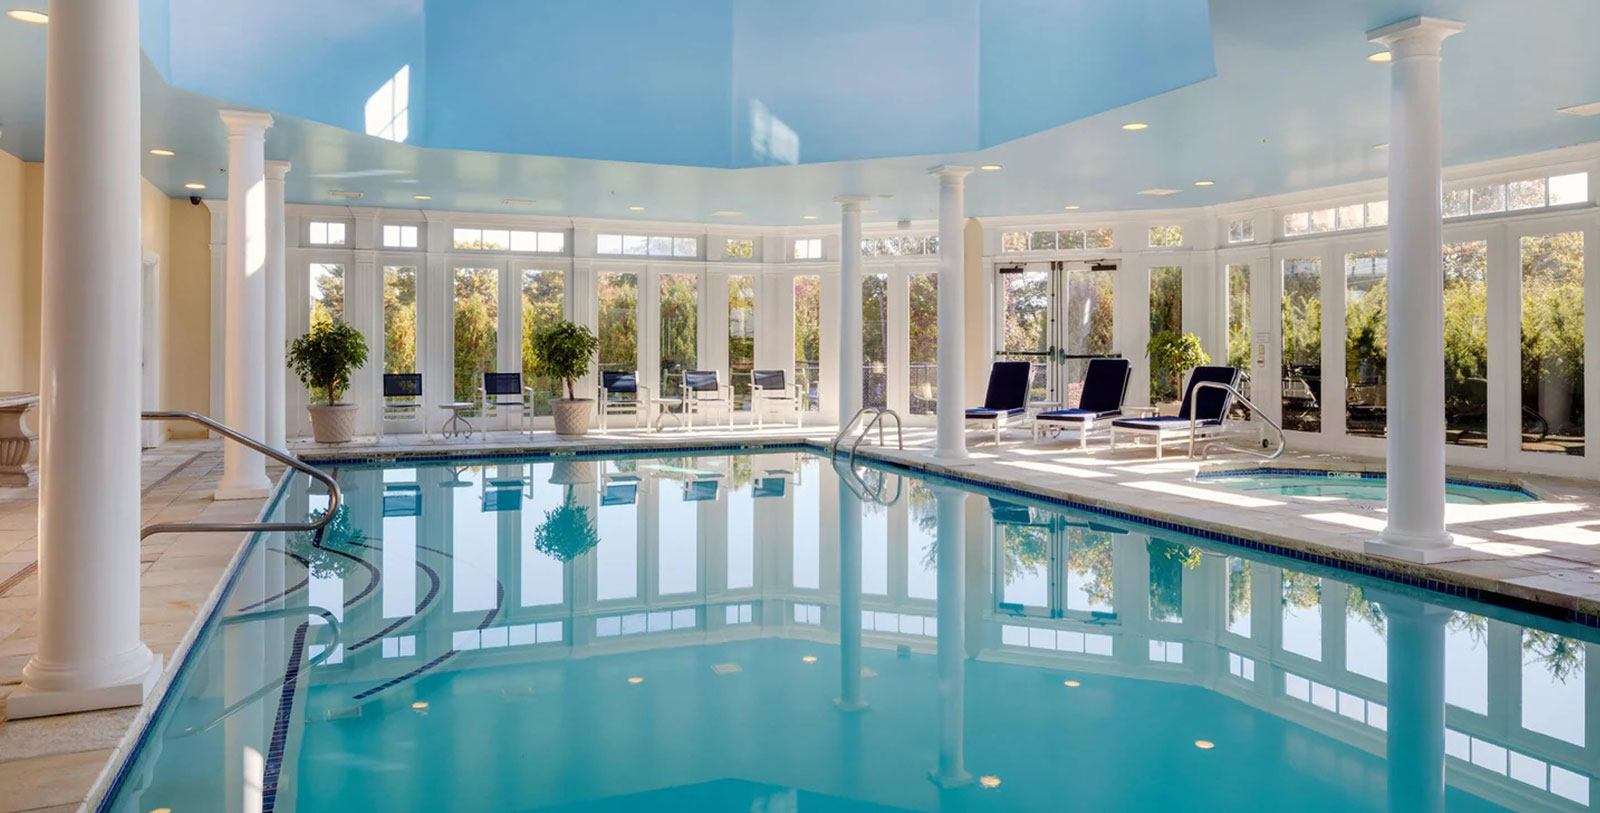 Experience a rejuvenating day of relaxation at the Wentworth's spa.